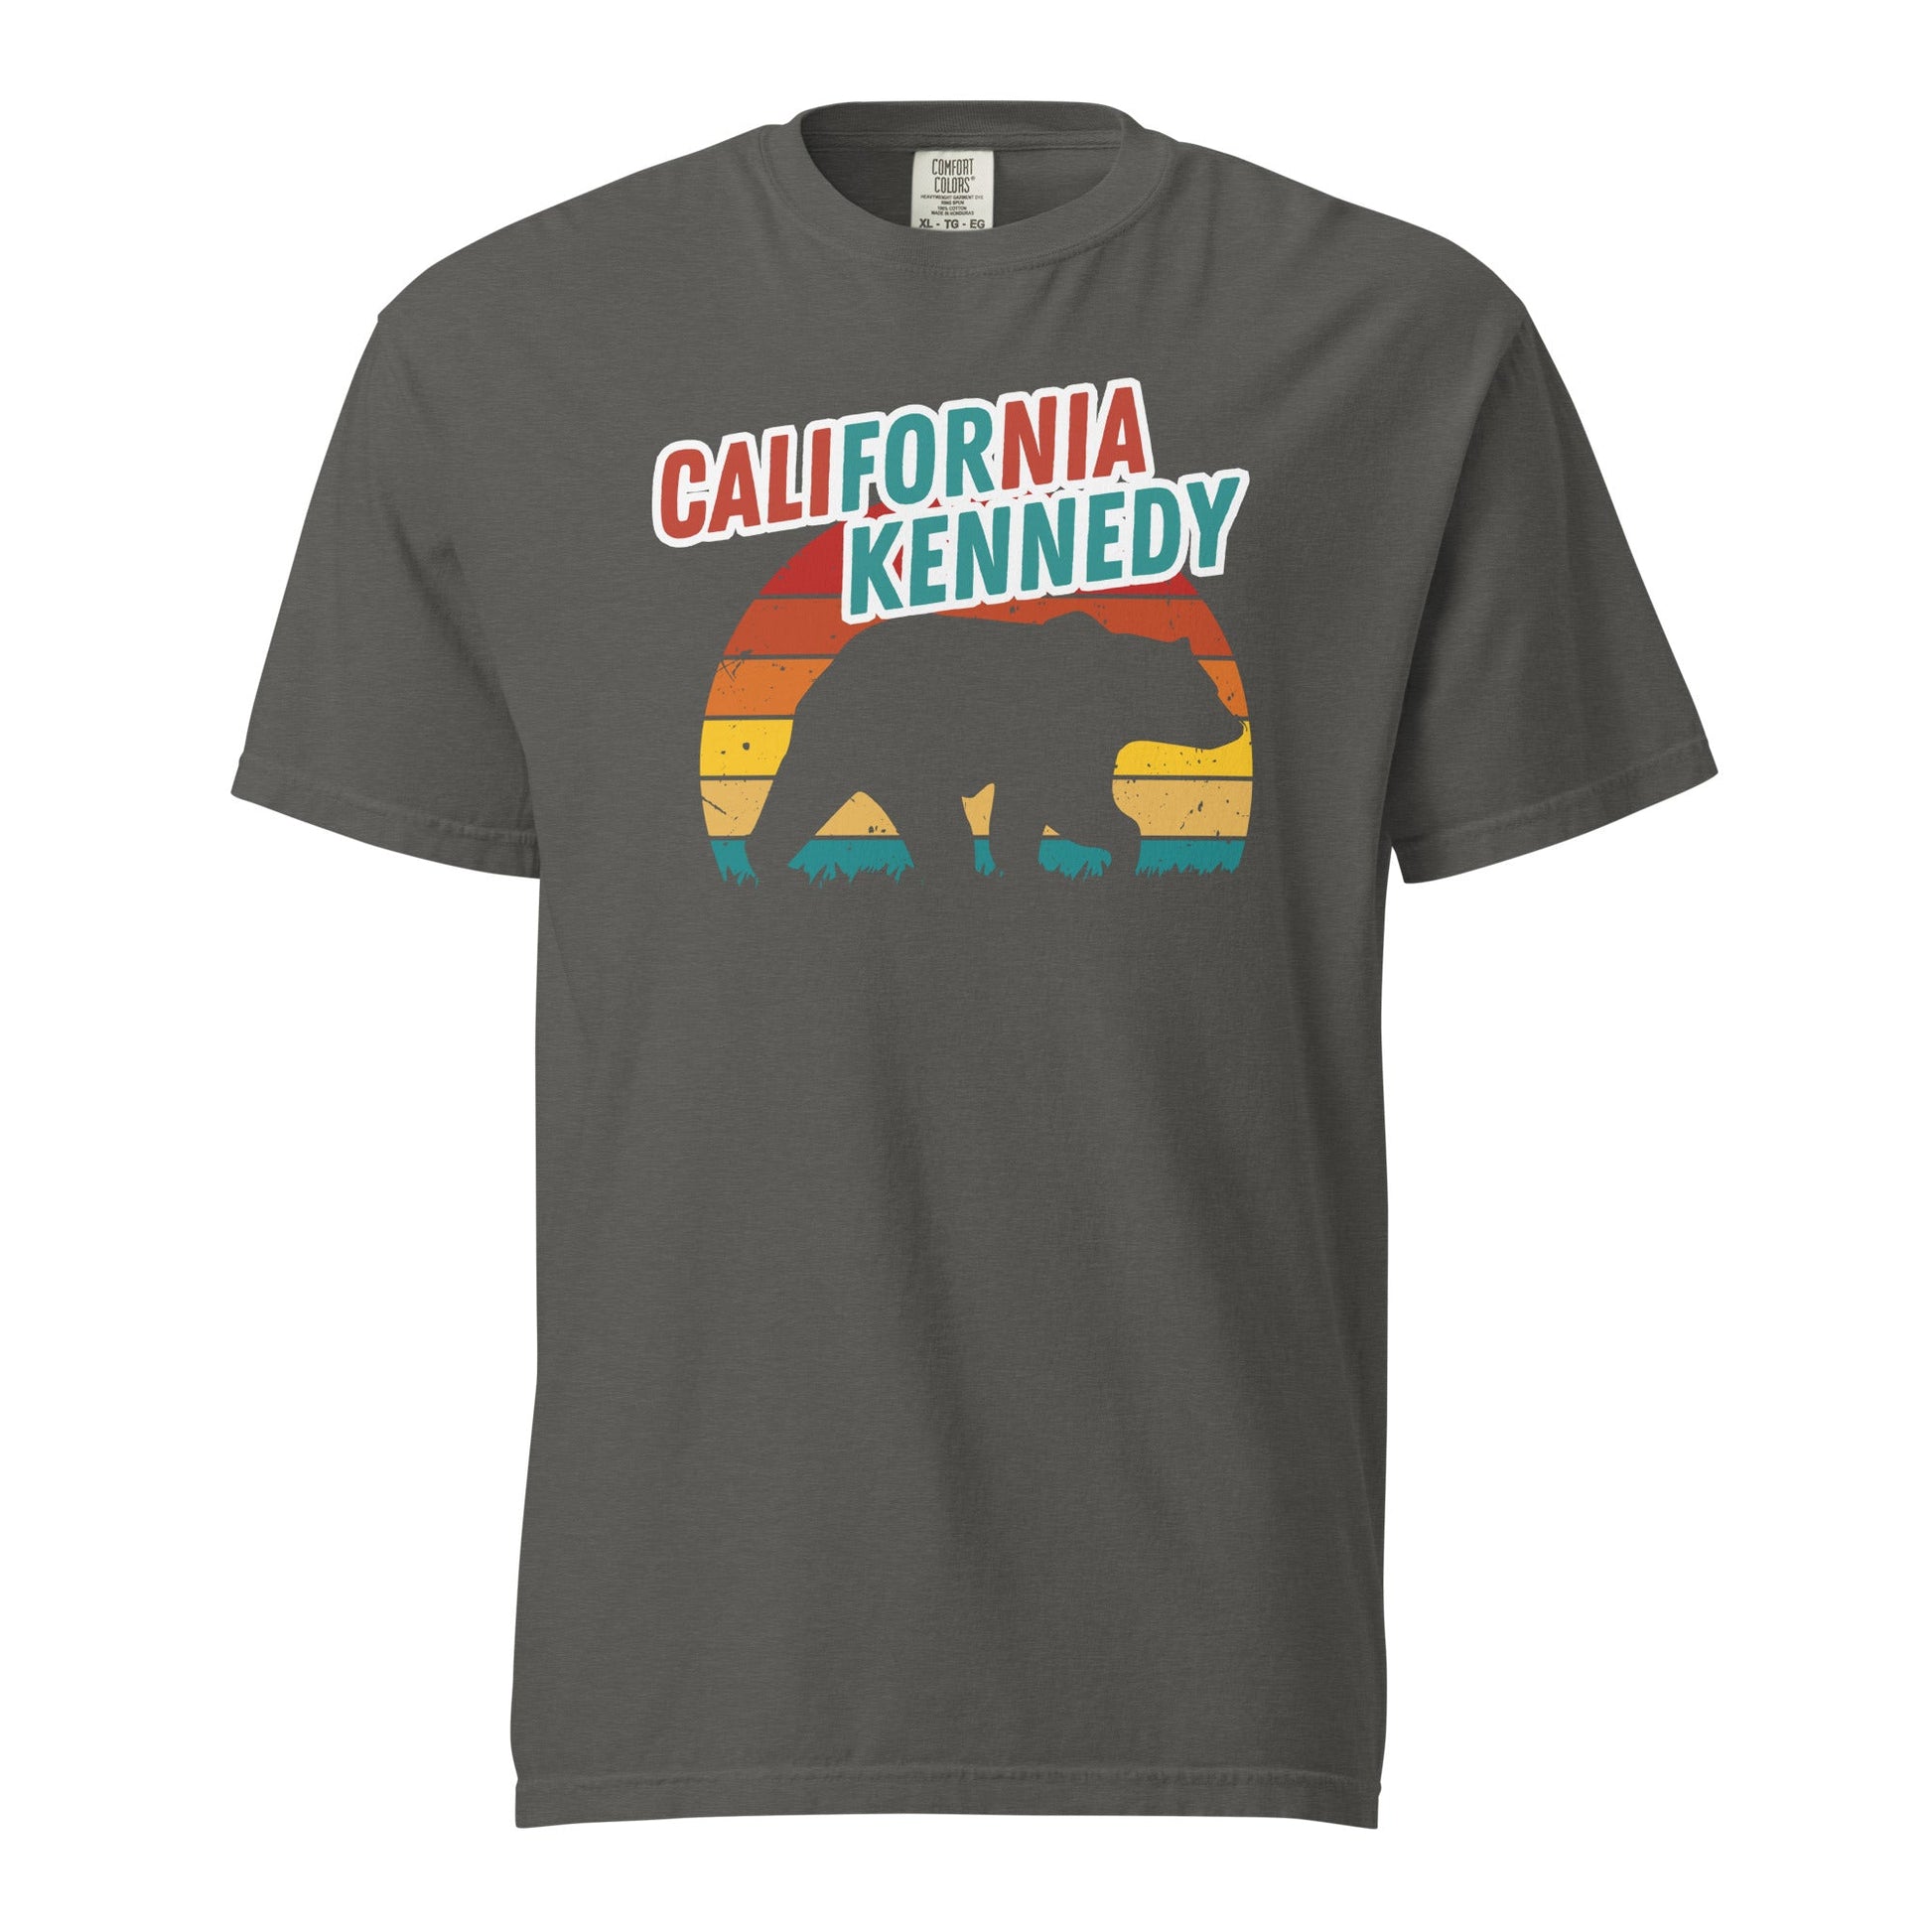 California for Kennedy Bear Unisex Heavyweight Tee - TEAM KENNEDY. All rights reserved